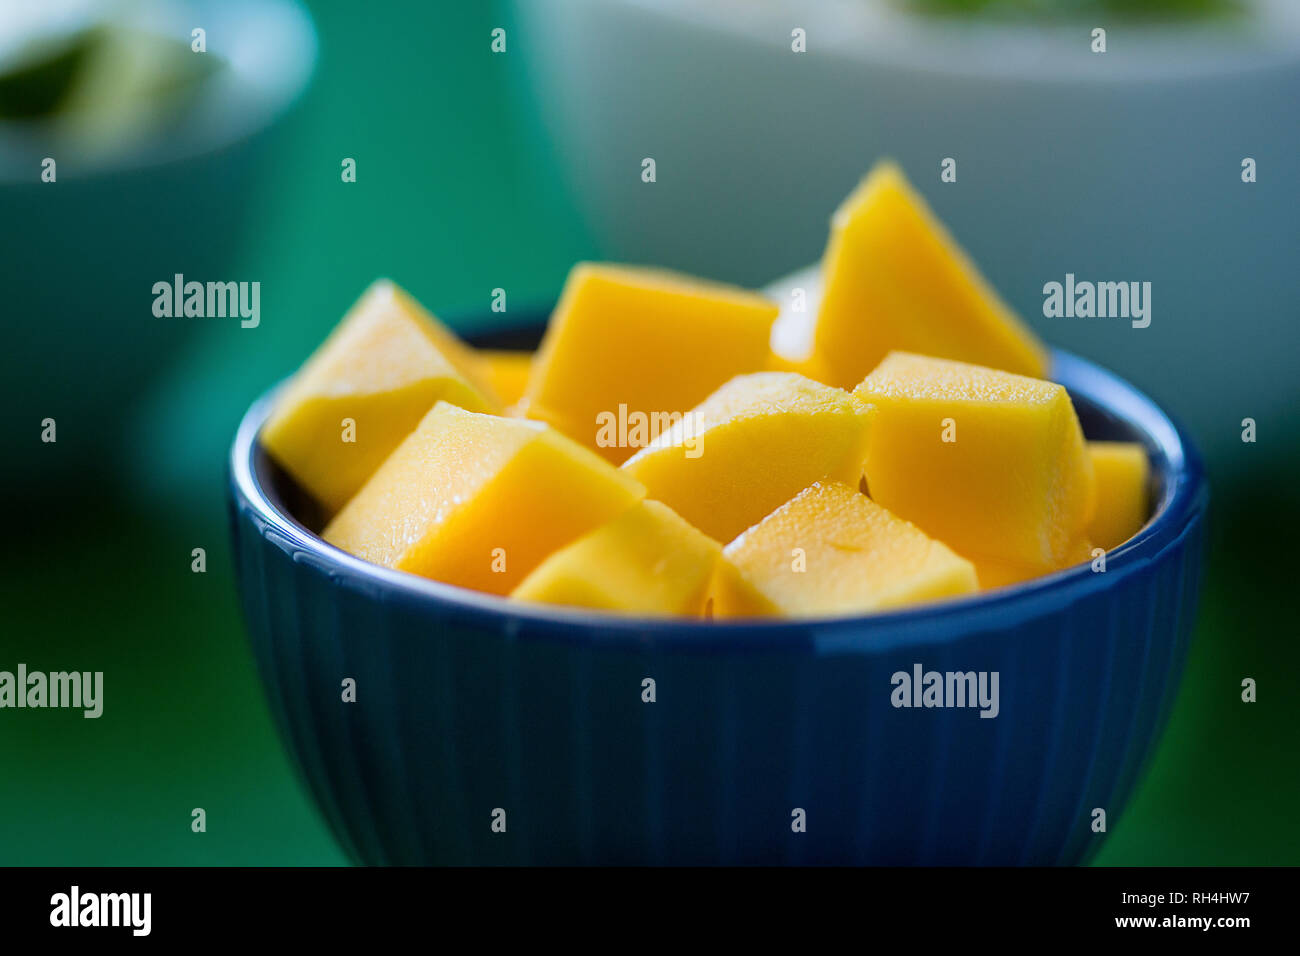 cut mango in blue bowl, other bowls of food in background Stock Photo